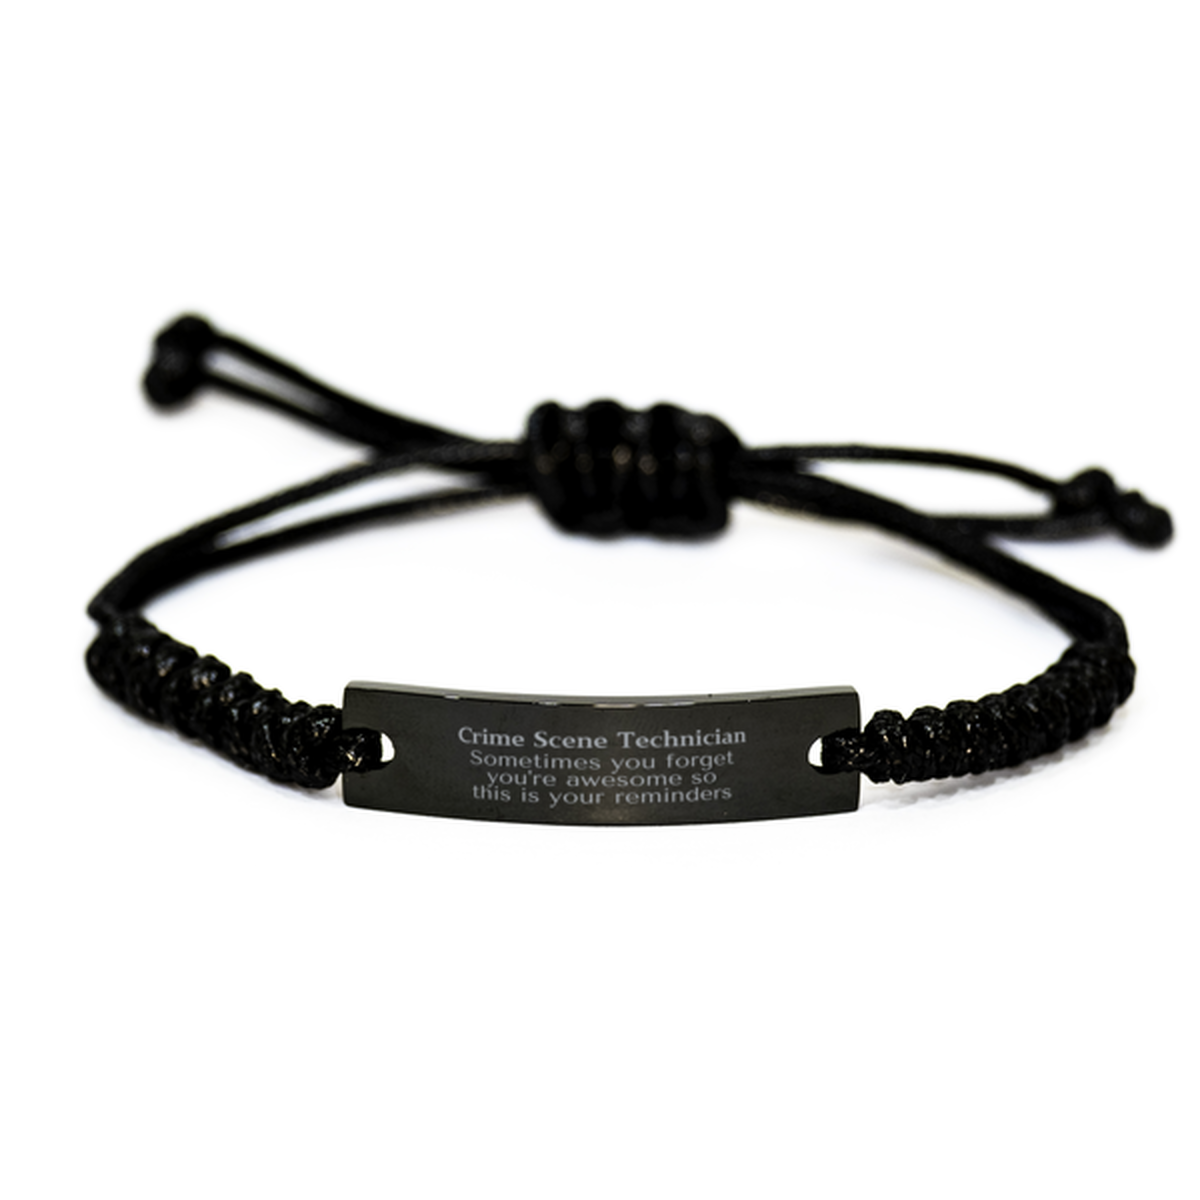 Sentimental Crime Scene Technician Black Rope Bracelet, Crime Scene Technician Sometimes you forget you're awesome so this is your reminders, Graduation Christmas Birthday Gifts for Crime Scene Technician, Men, Women, Coworkers